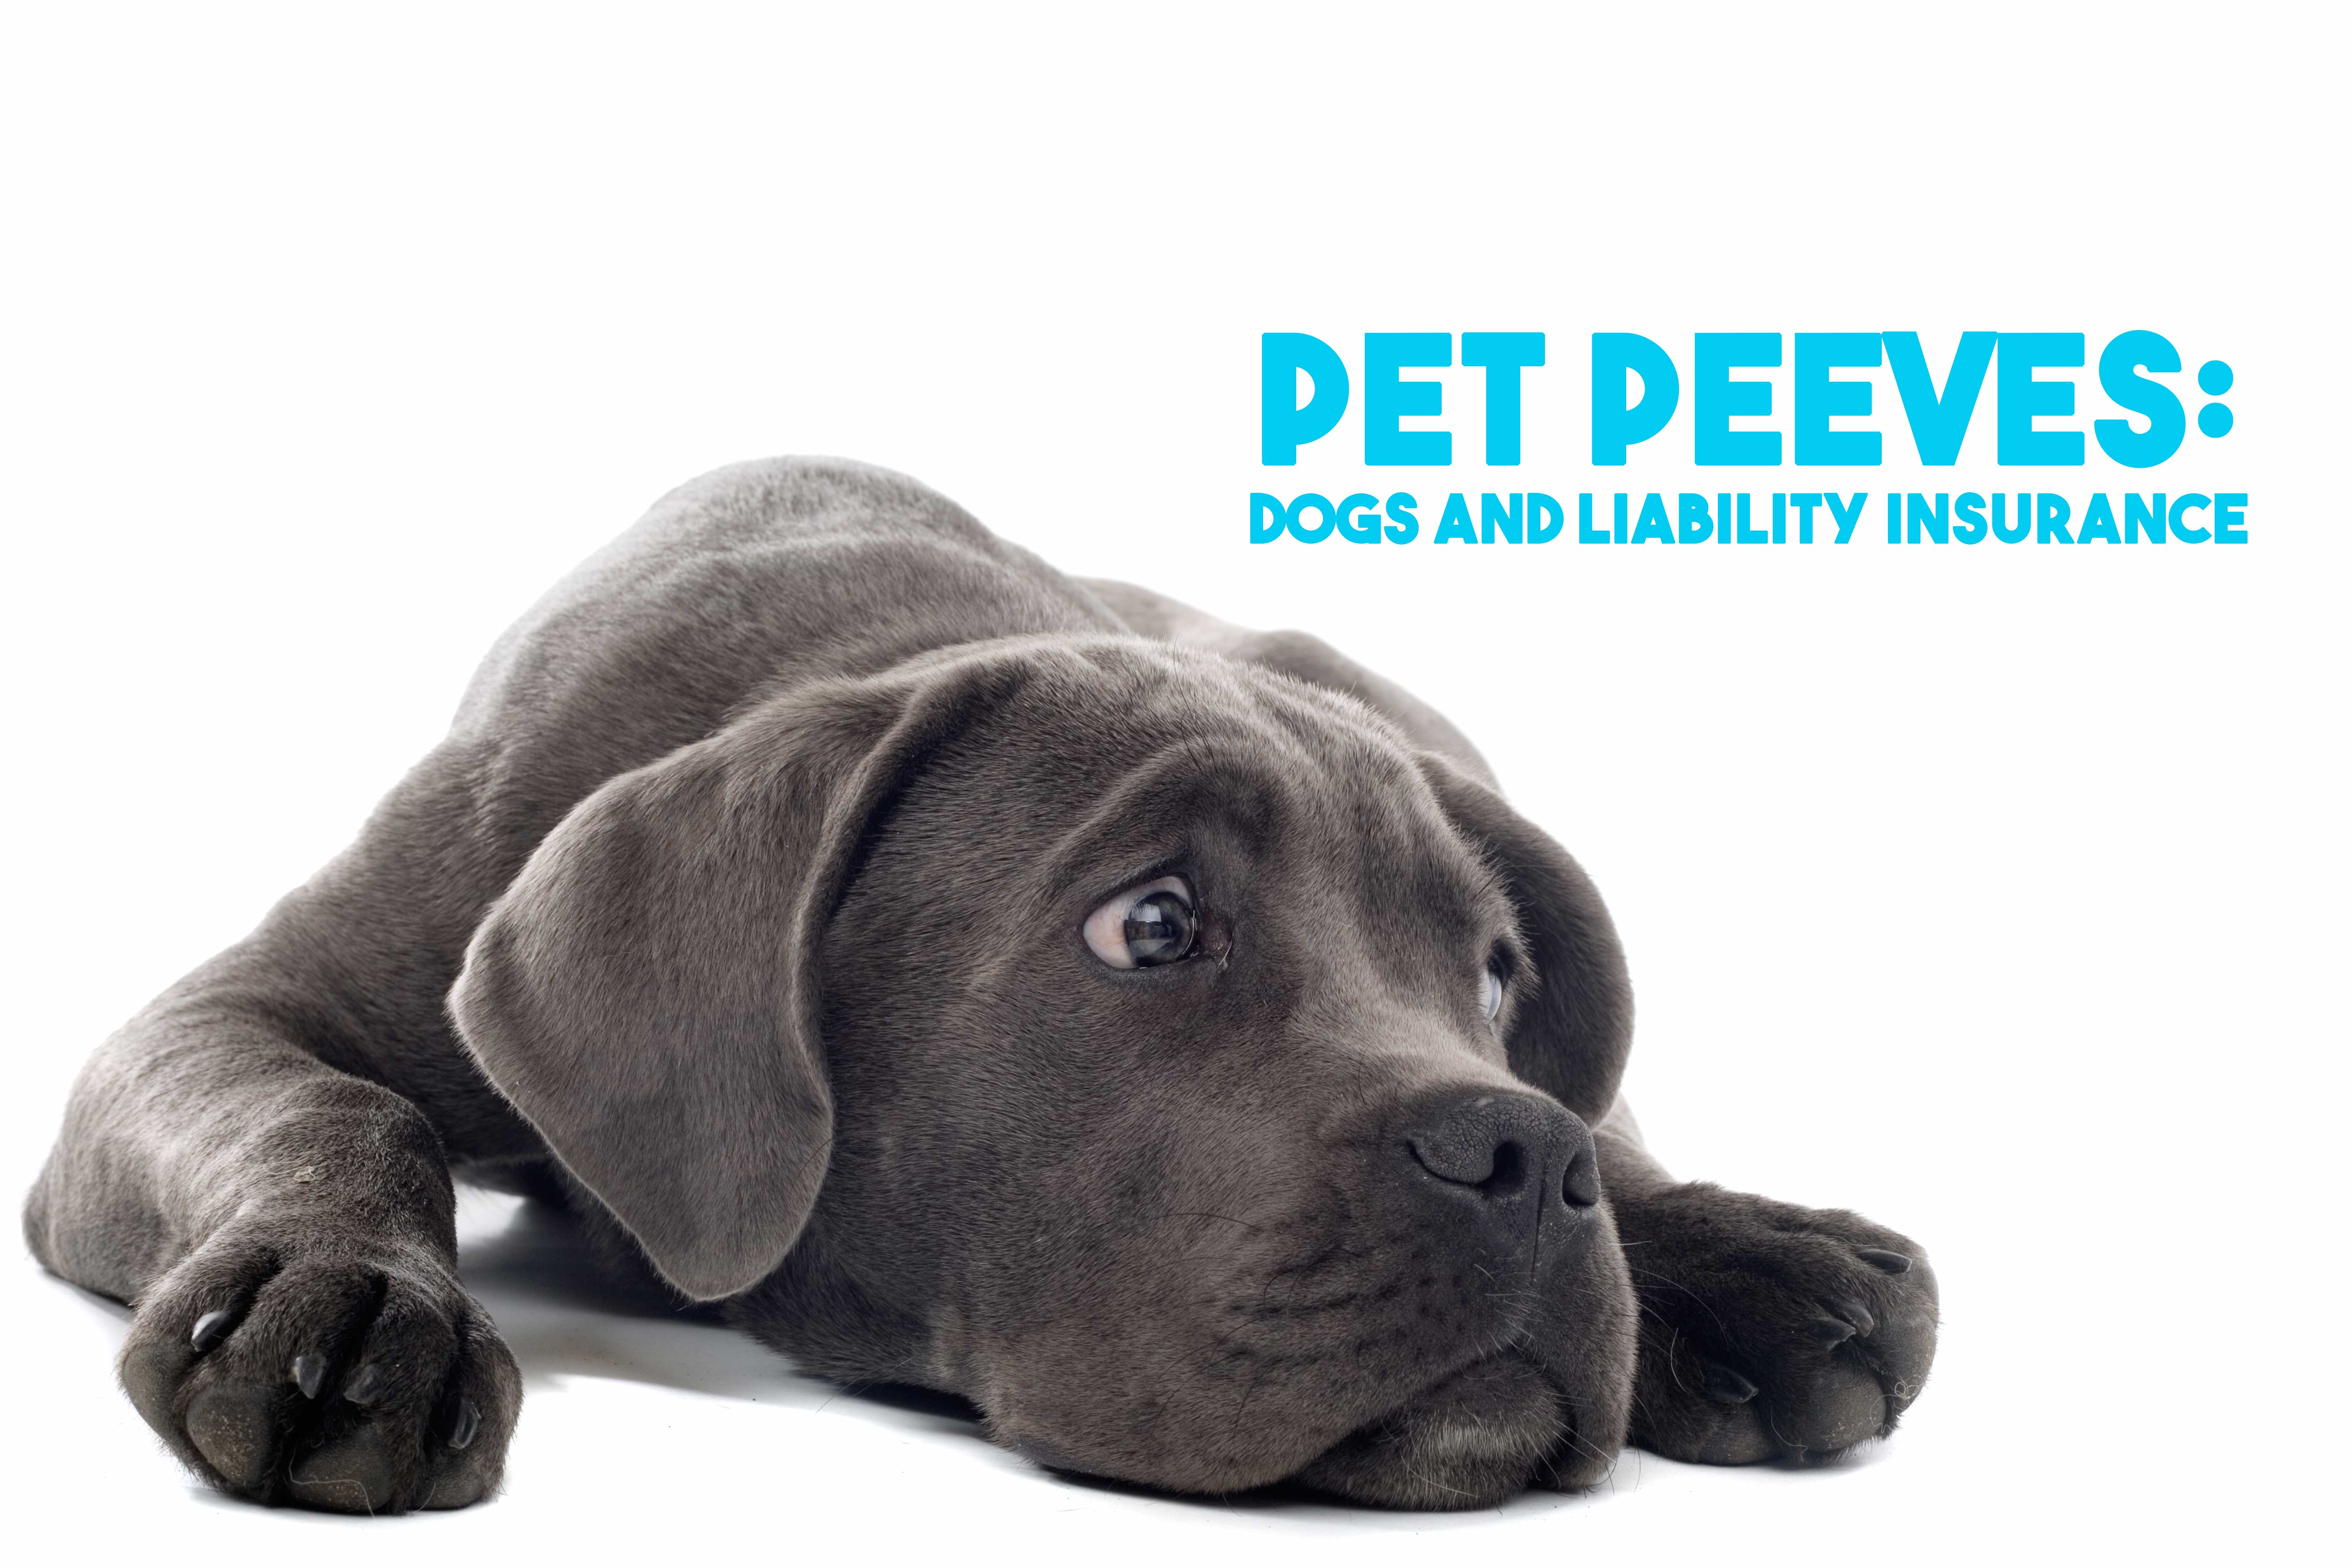 Pet Peeves: Dogs and Liability Insurance - COMPANY